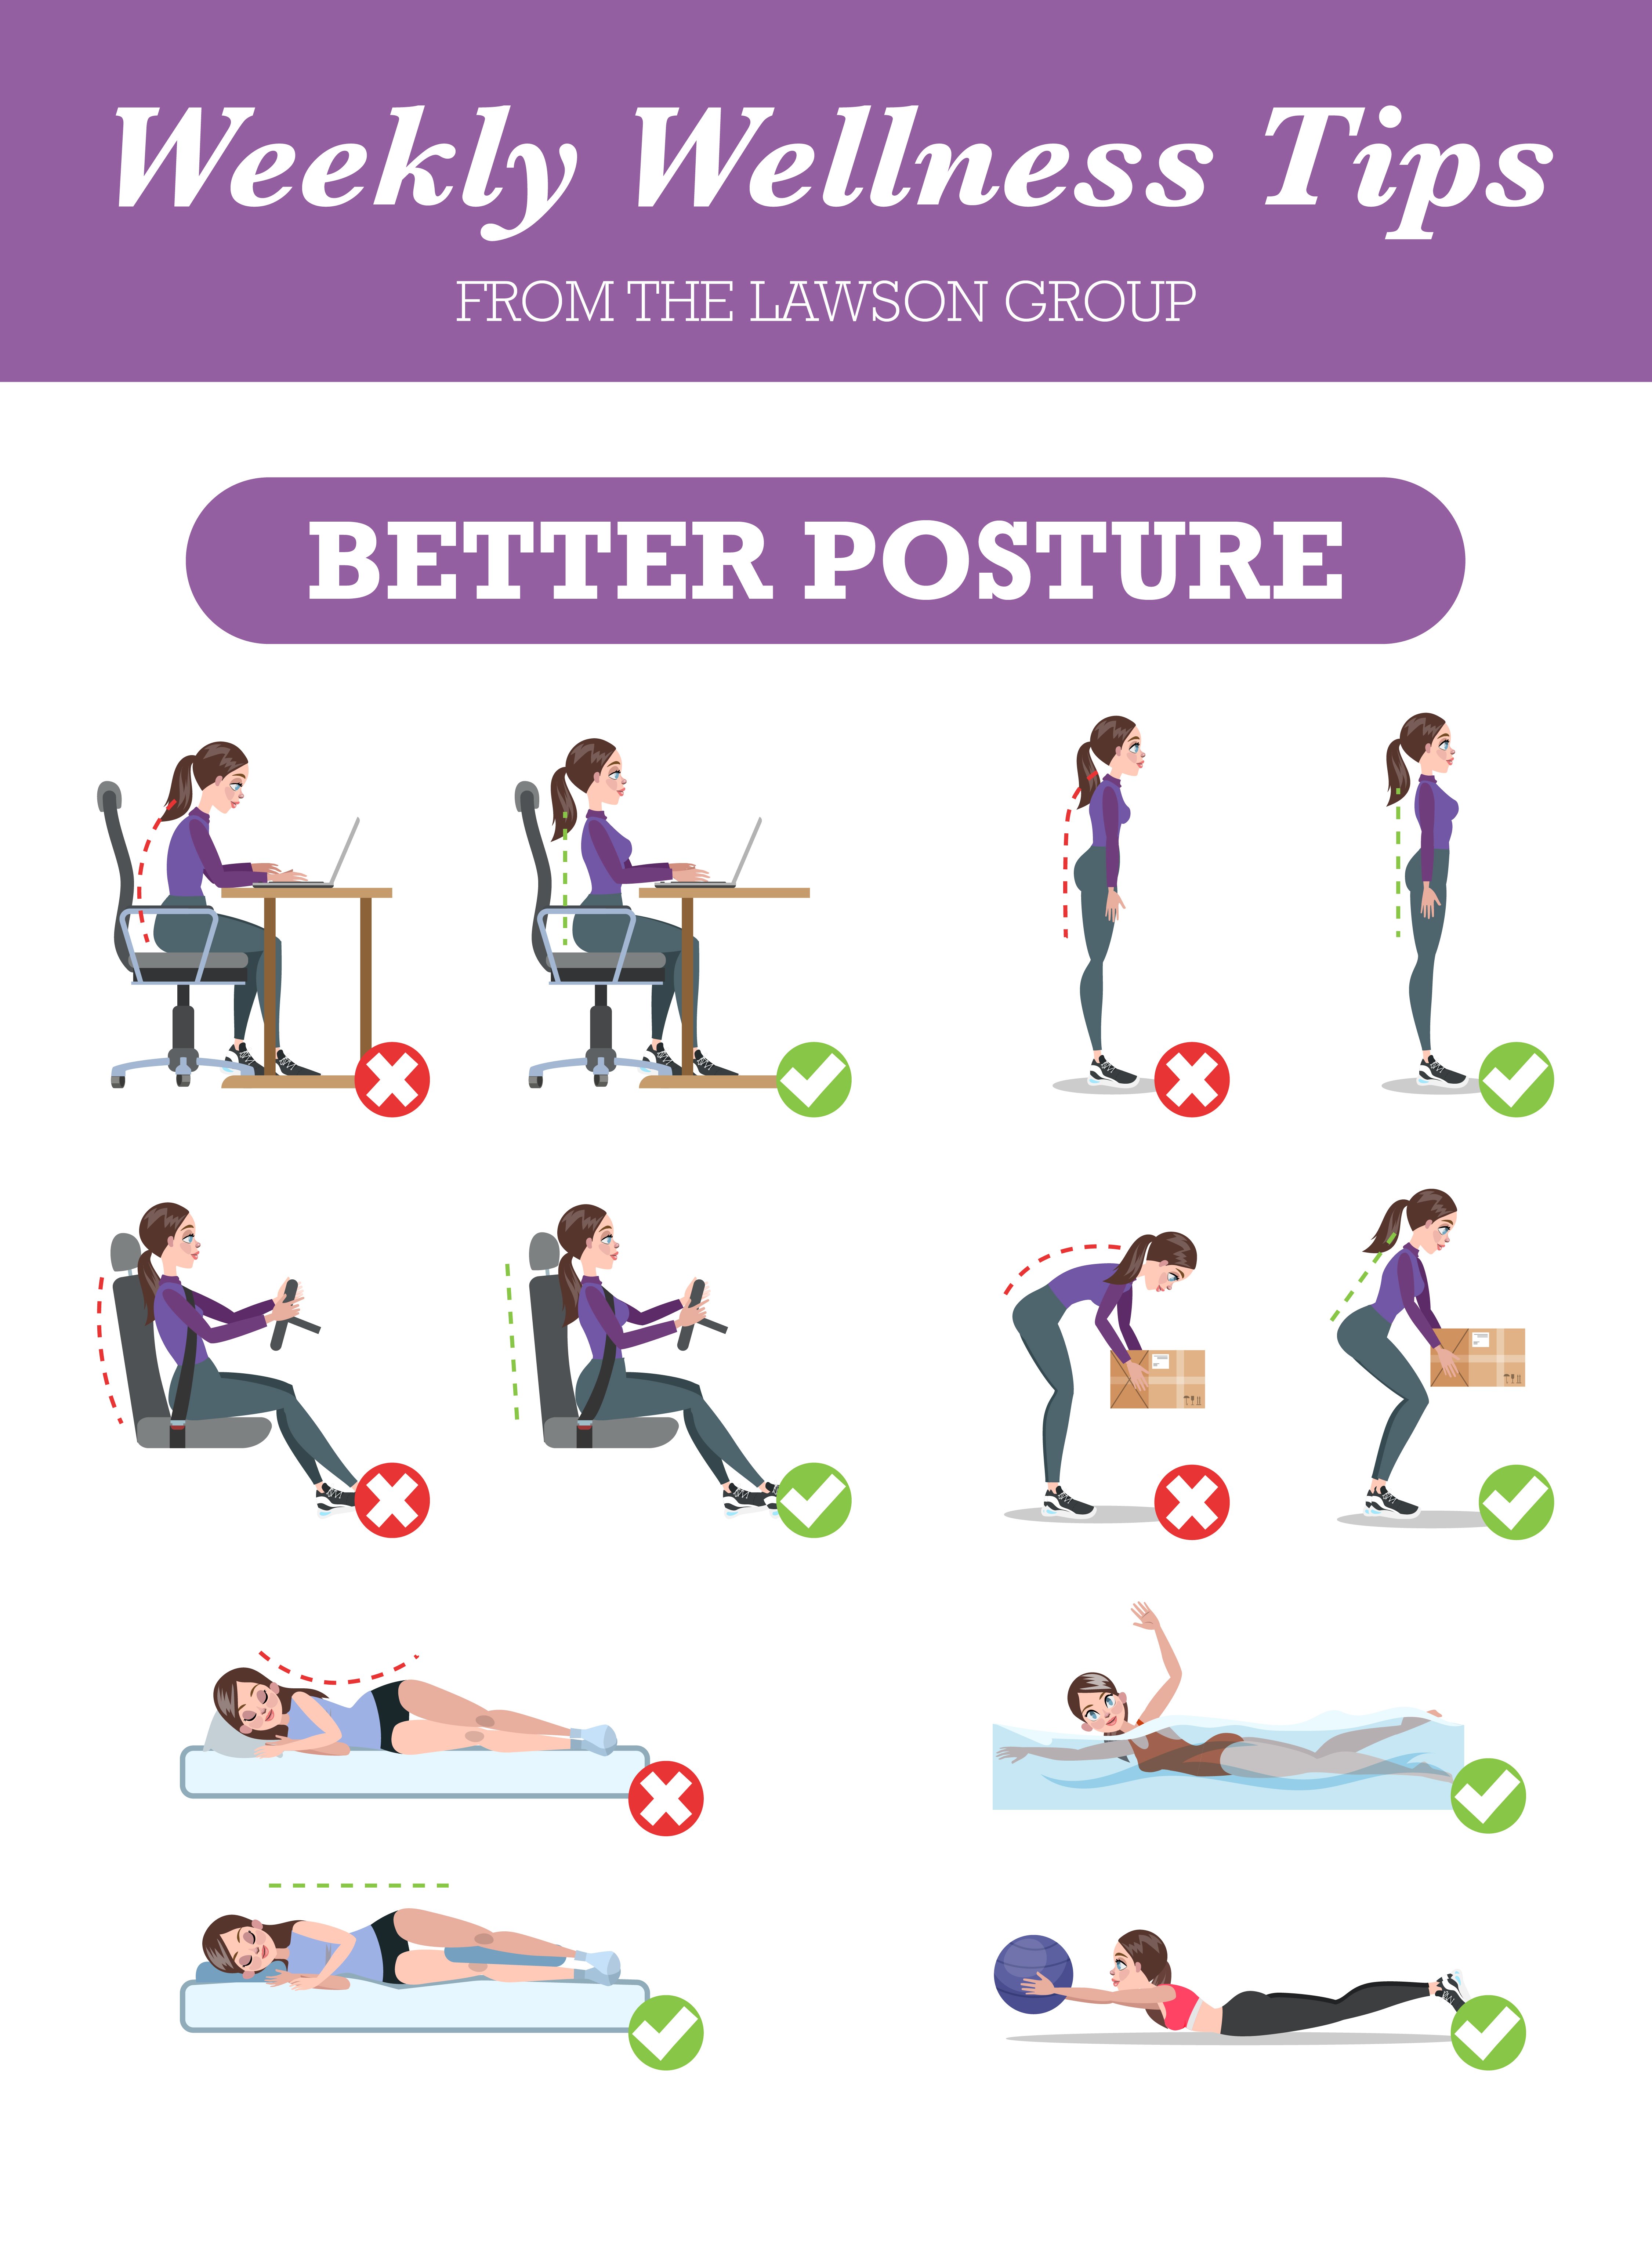 TLG22005 Wellness Tips Better Posture Infographic-1080px-01